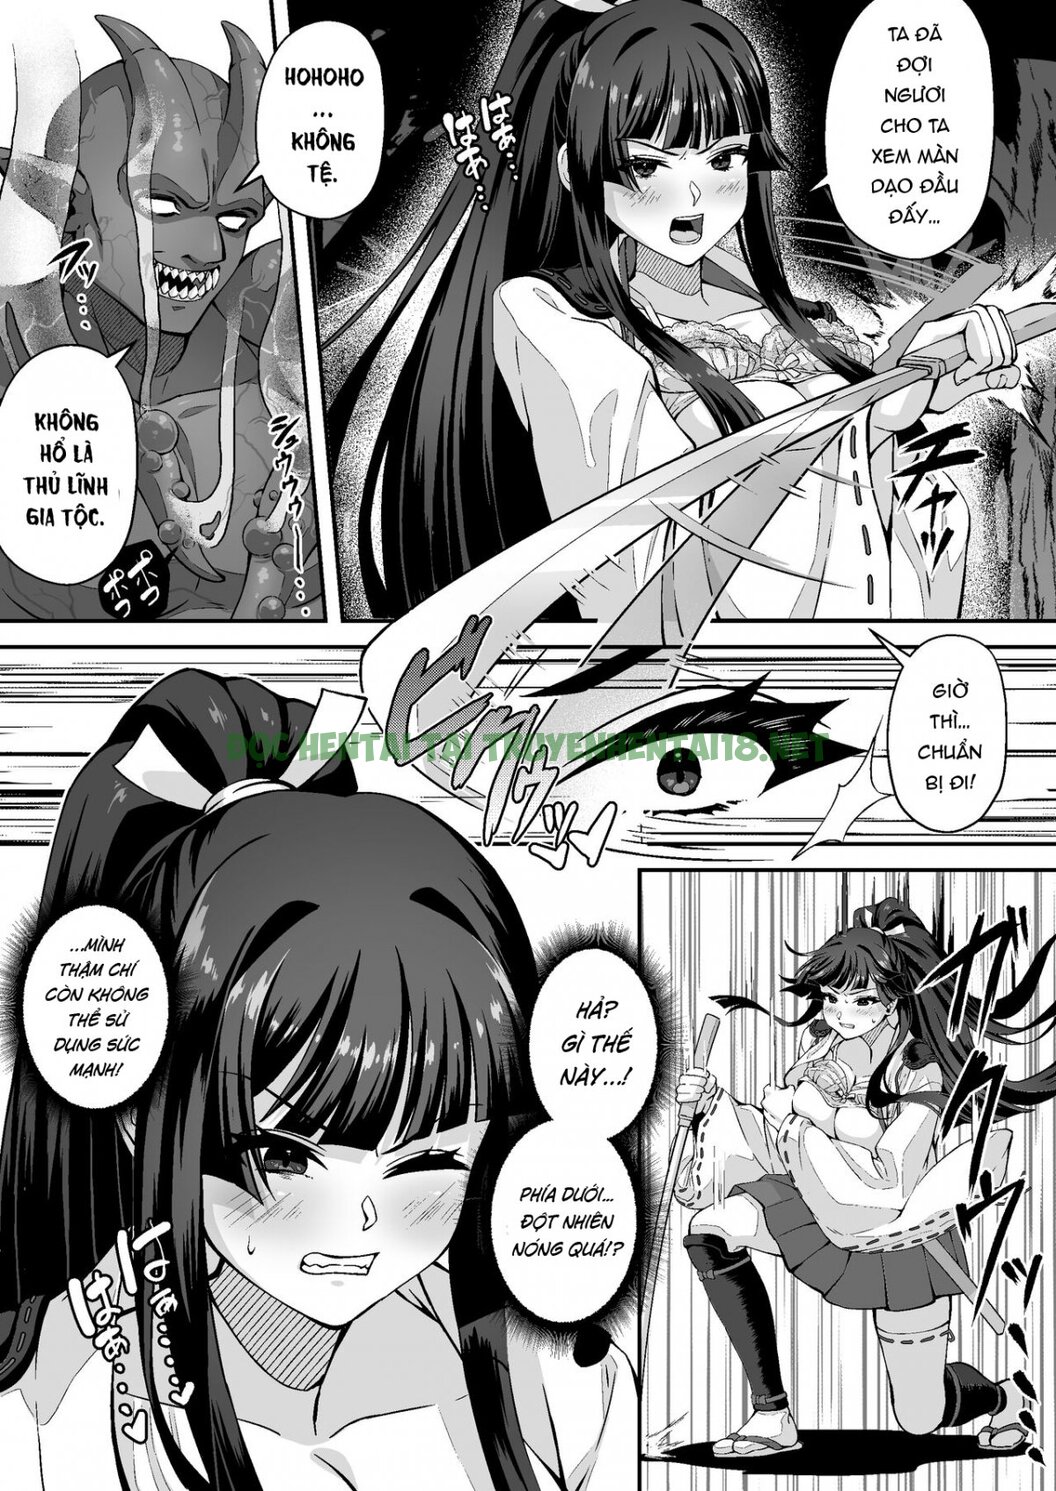 Hình ảnh 24 trong The Master Demon Exorcist Doesn't Succumb To Tentacle Demon - One Shot